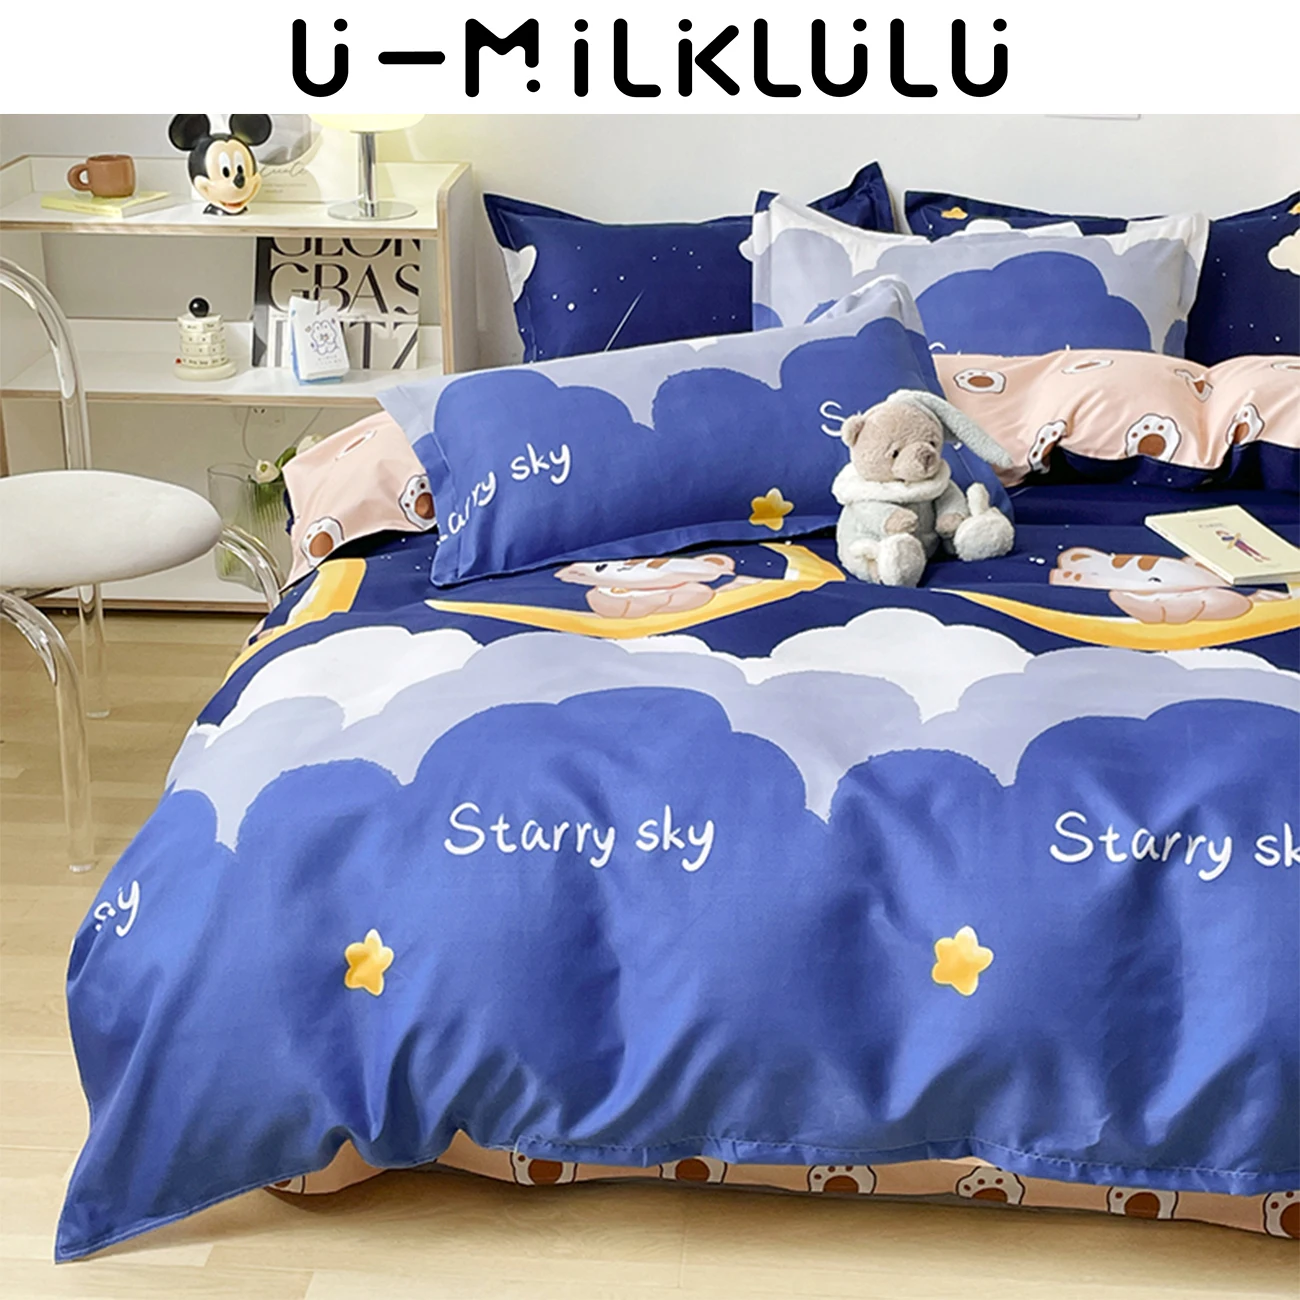 Bed Sheets And Pillowcases Luxury Blue Sky Cartoon Duvet Cover Set 180